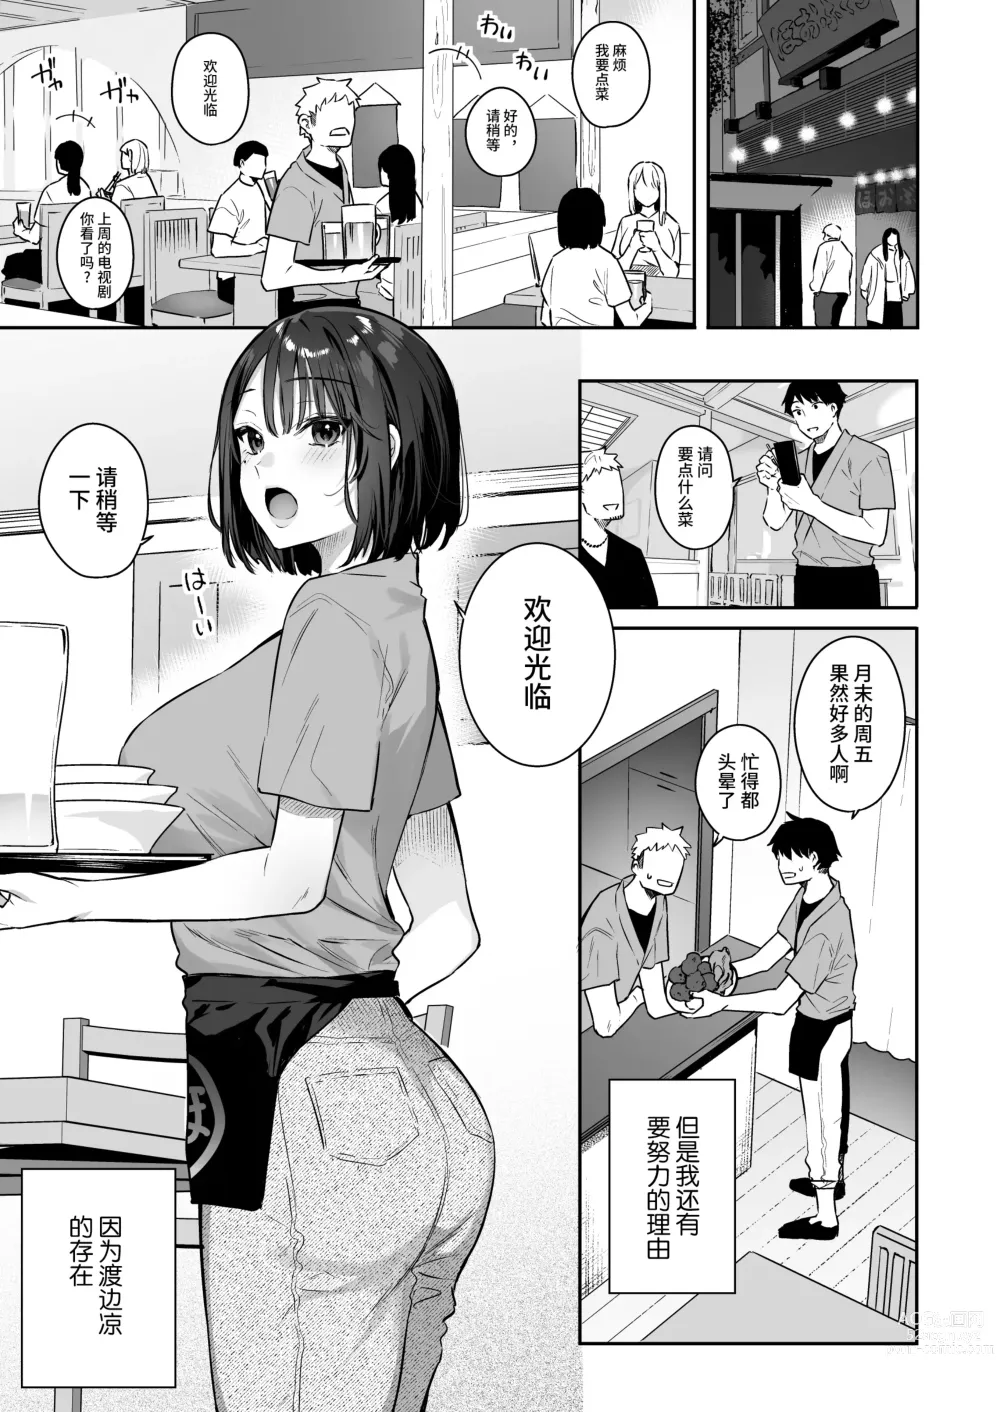 Page 3 of doujinshi 她的发情开关